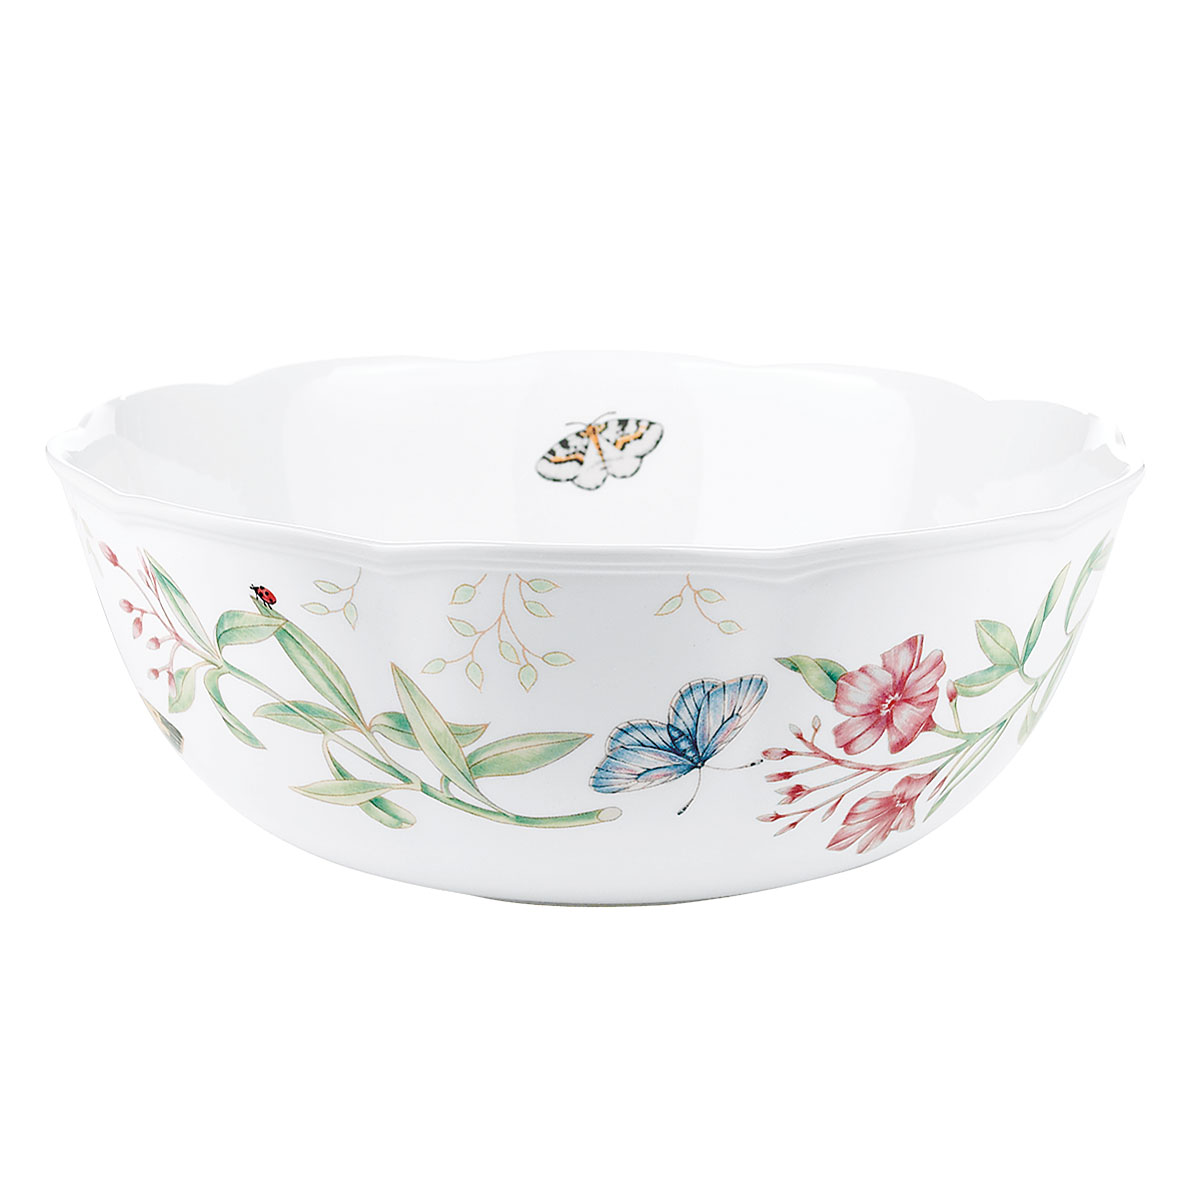 Lenox Butterfly Meadow China Serving Bowl